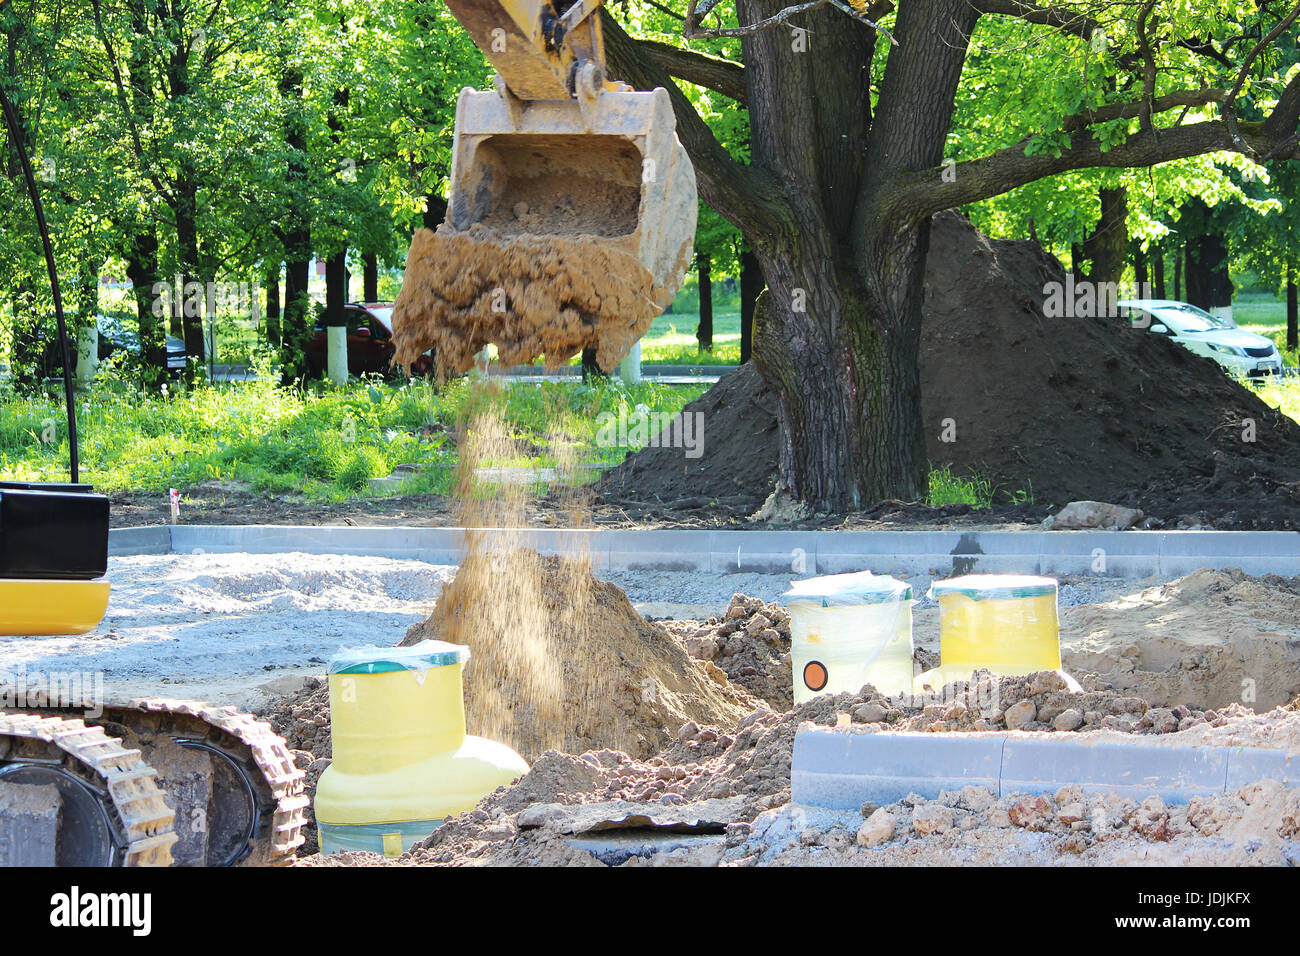 Excavator digs to plastic tank gas oil catcher in the ground during the construction of a car park for tourist buses, Russia Stock Photo